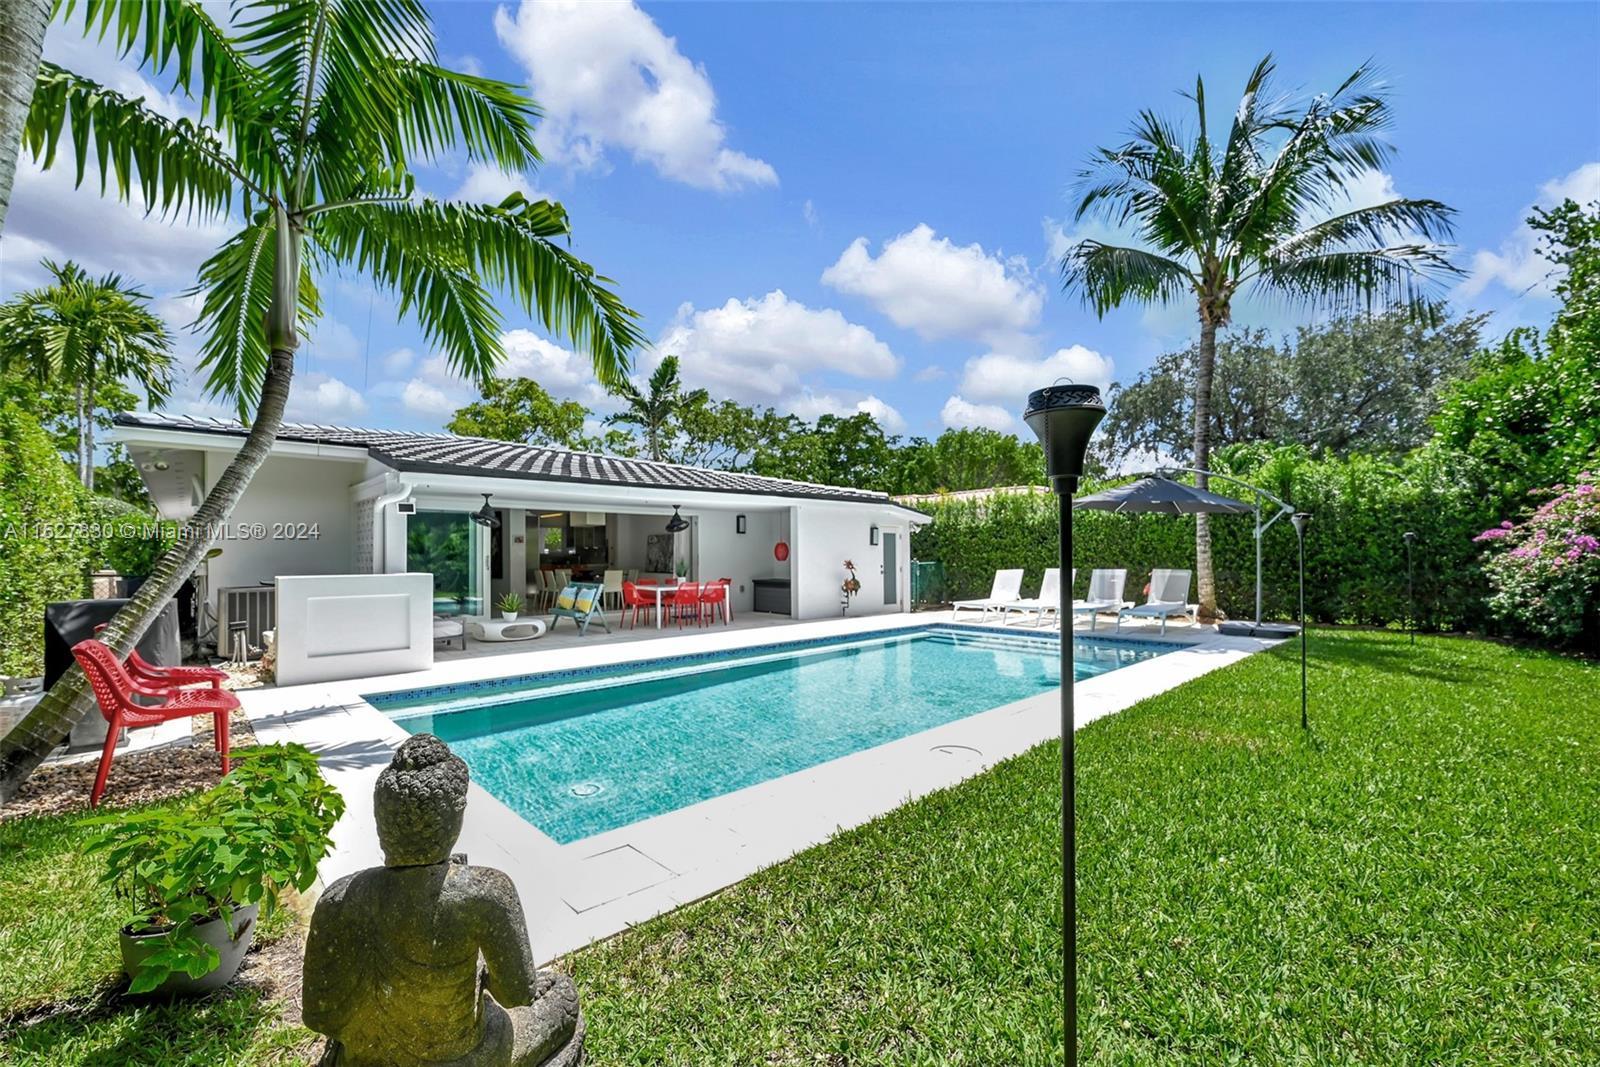 Photo of 825 Malaga Ave in Coral Gables, FL